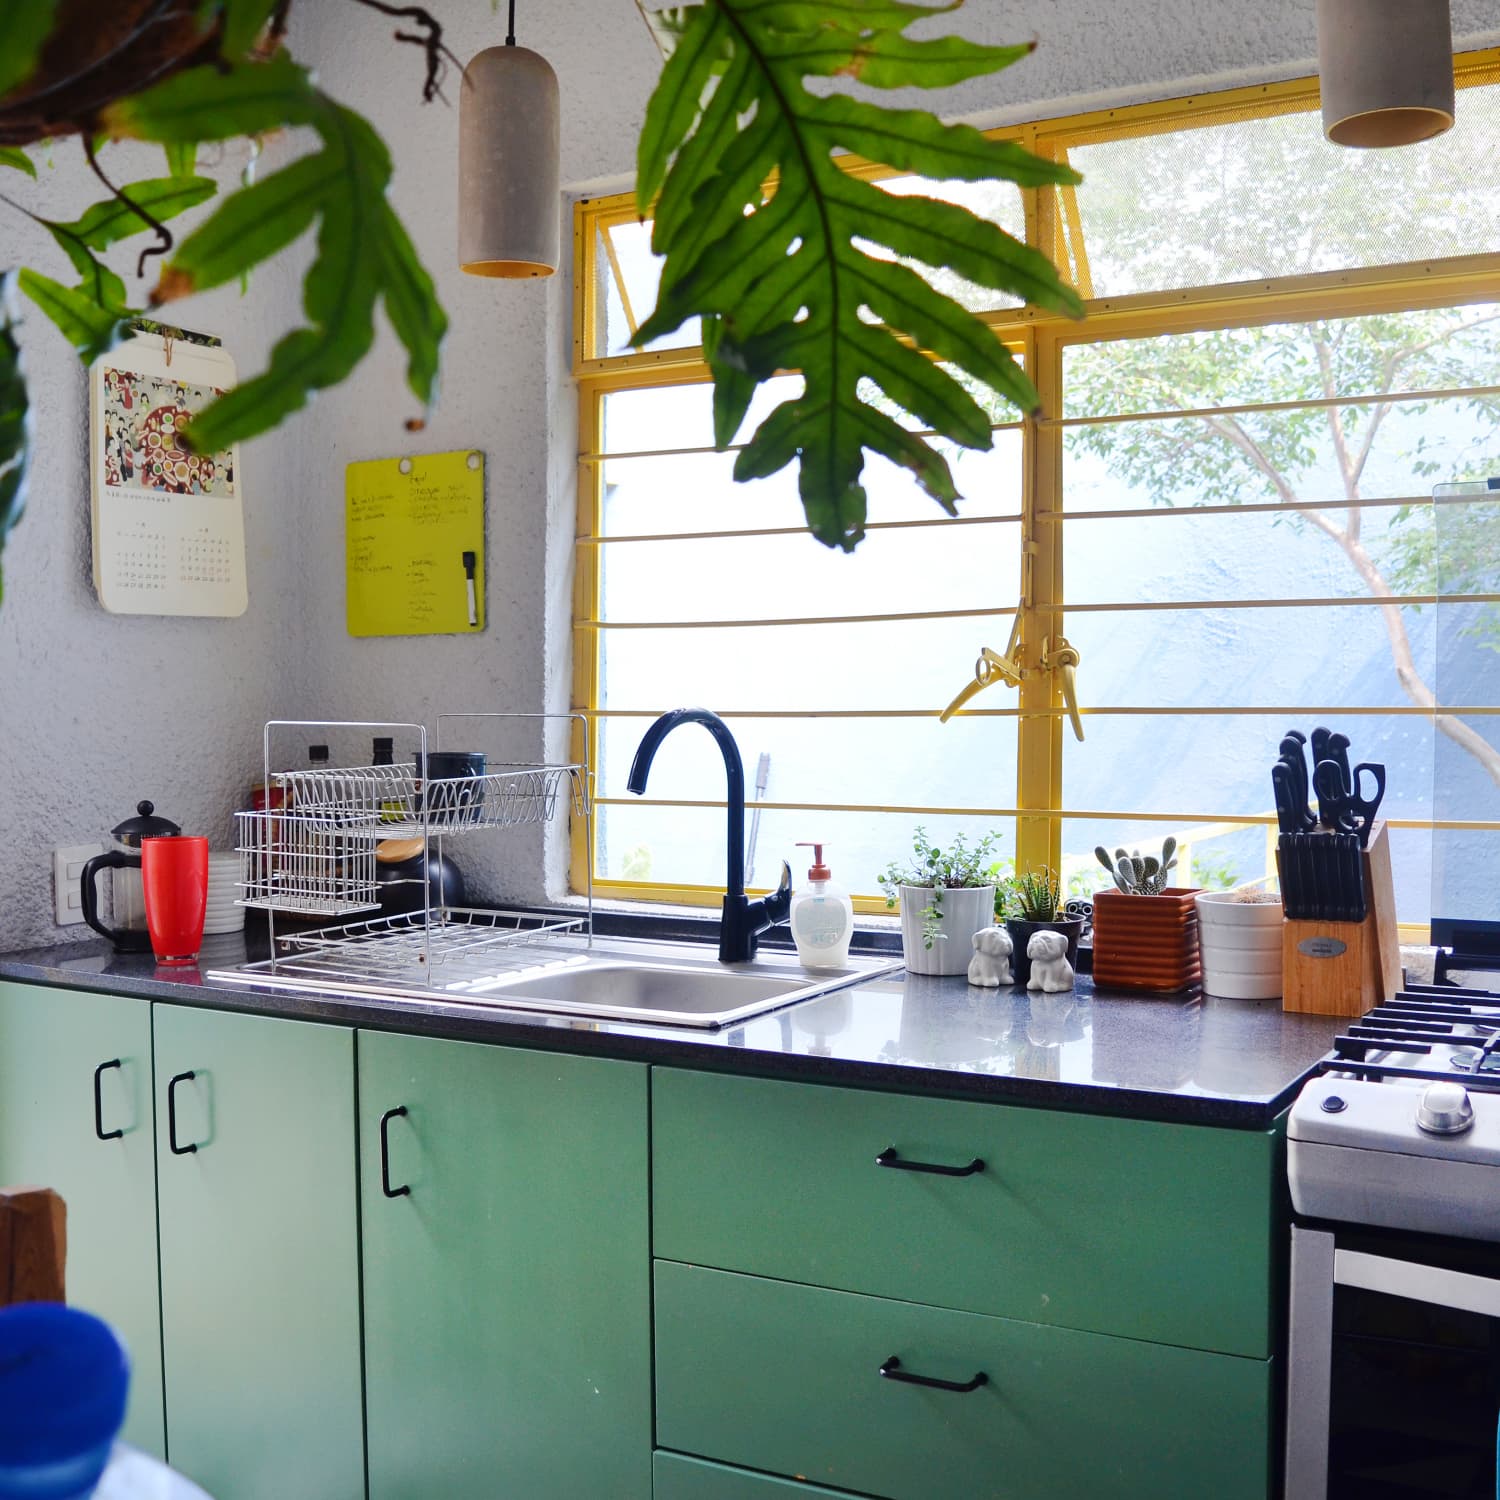 21 Little Ways to Have a Cleaner Kitchen